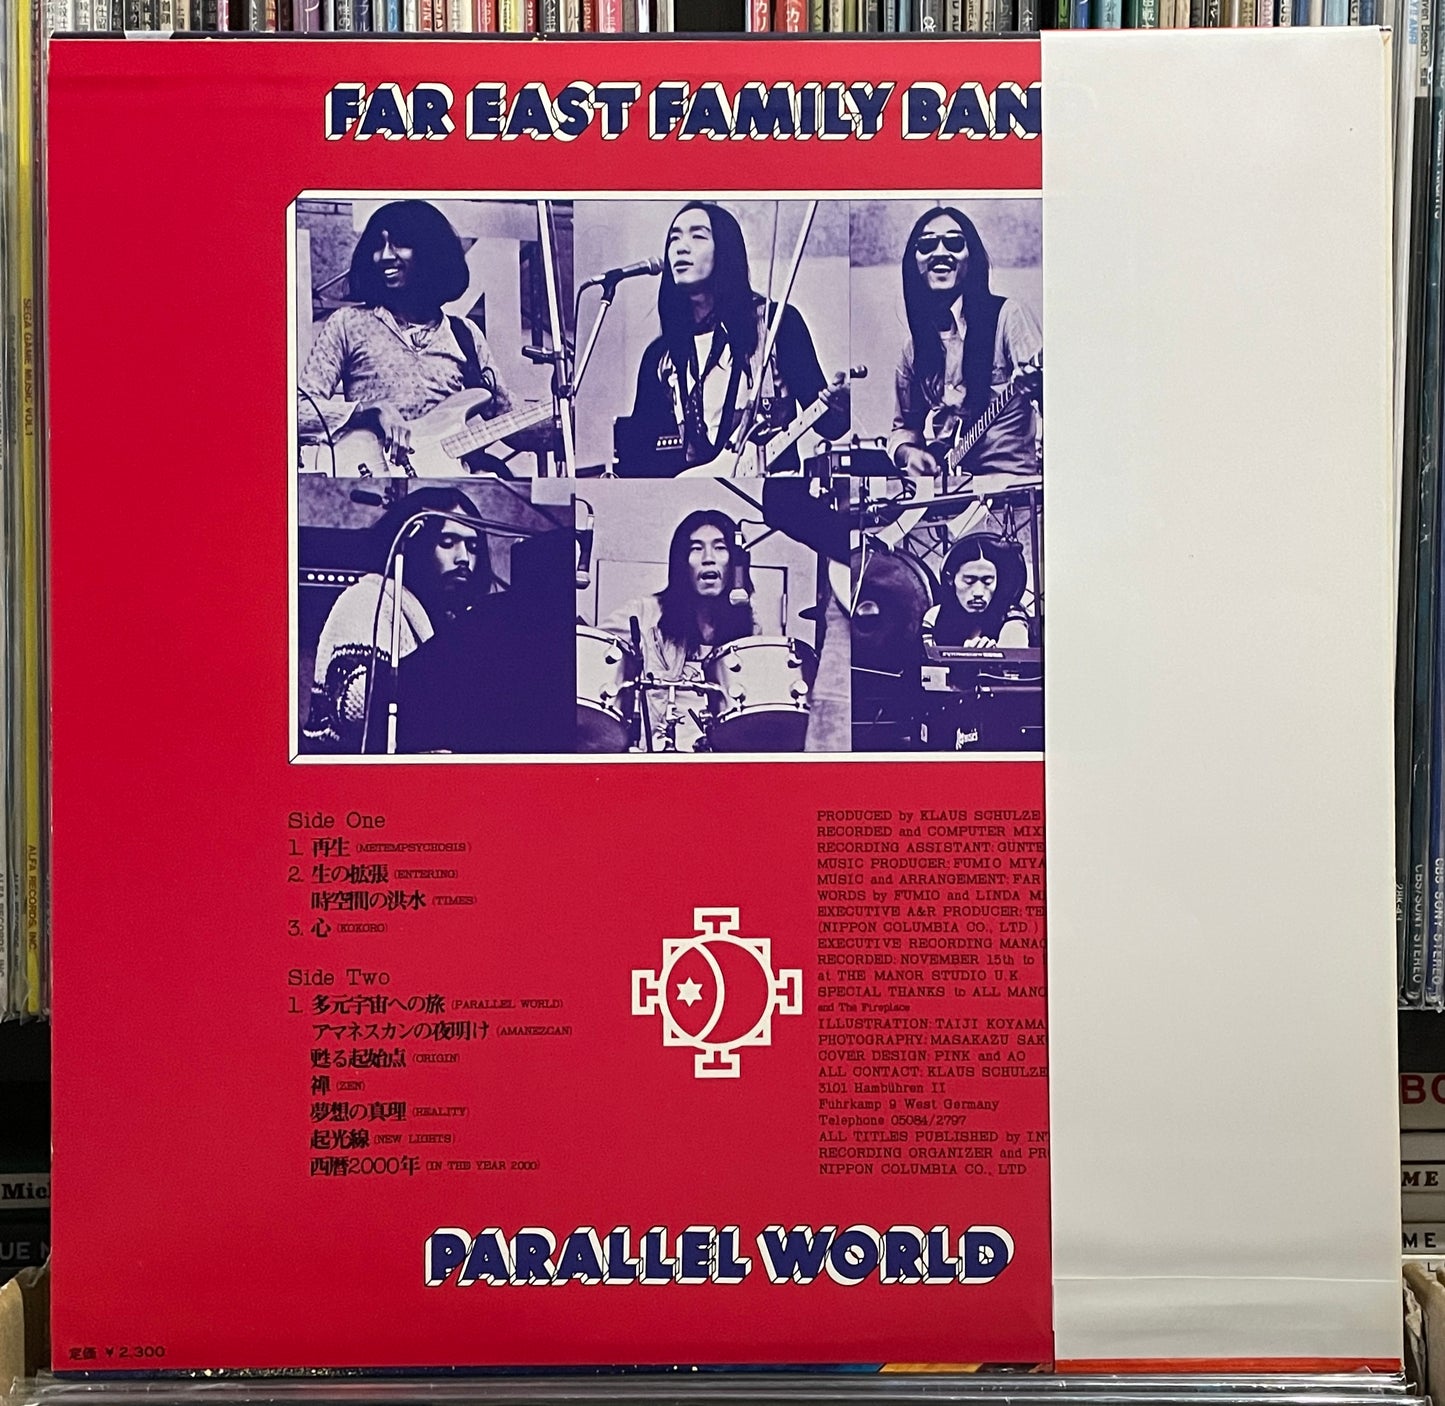 Far East Family Band “Parallel World” (1976)